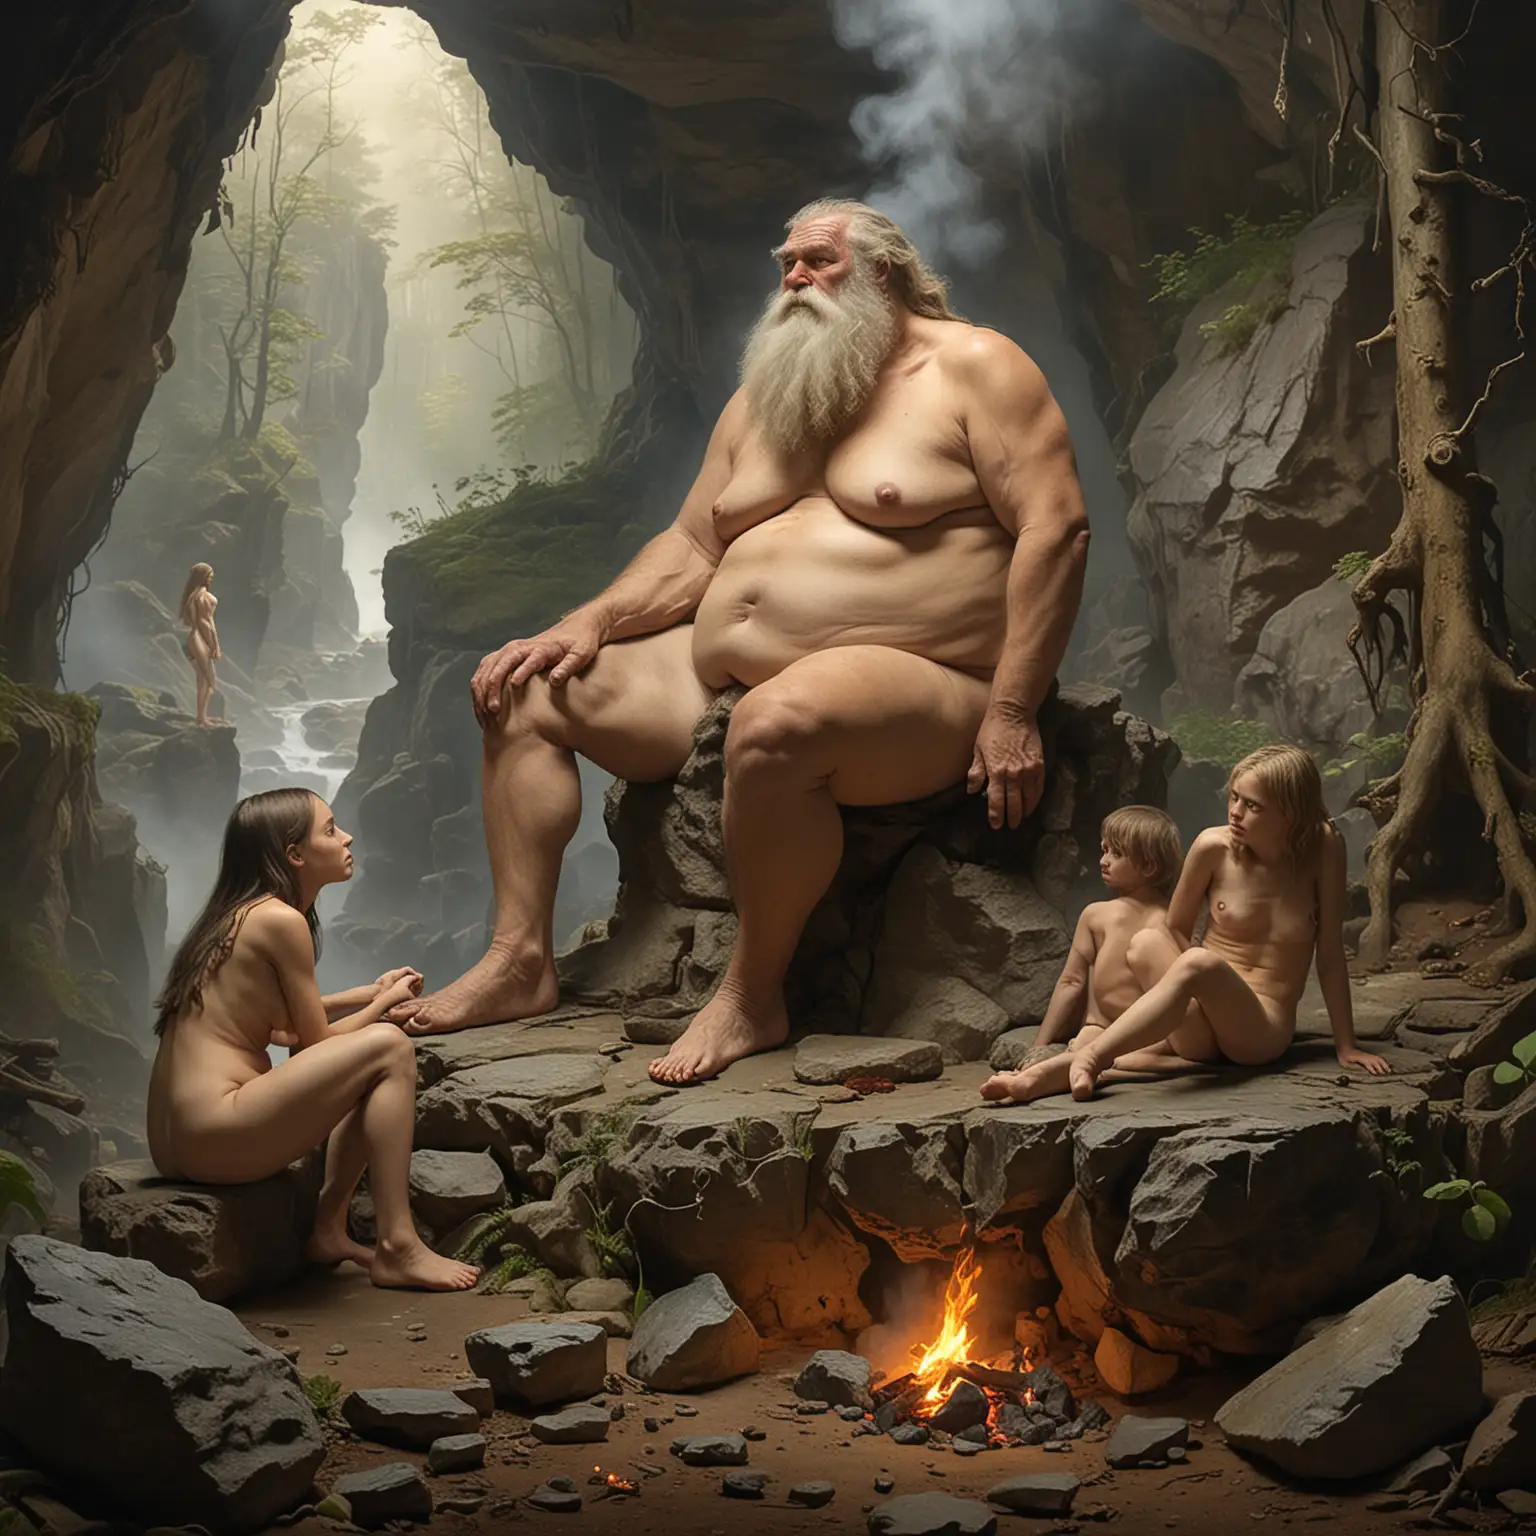 Primitive Hill Giant Cooking with Two Young Females in Misty Forest Cave